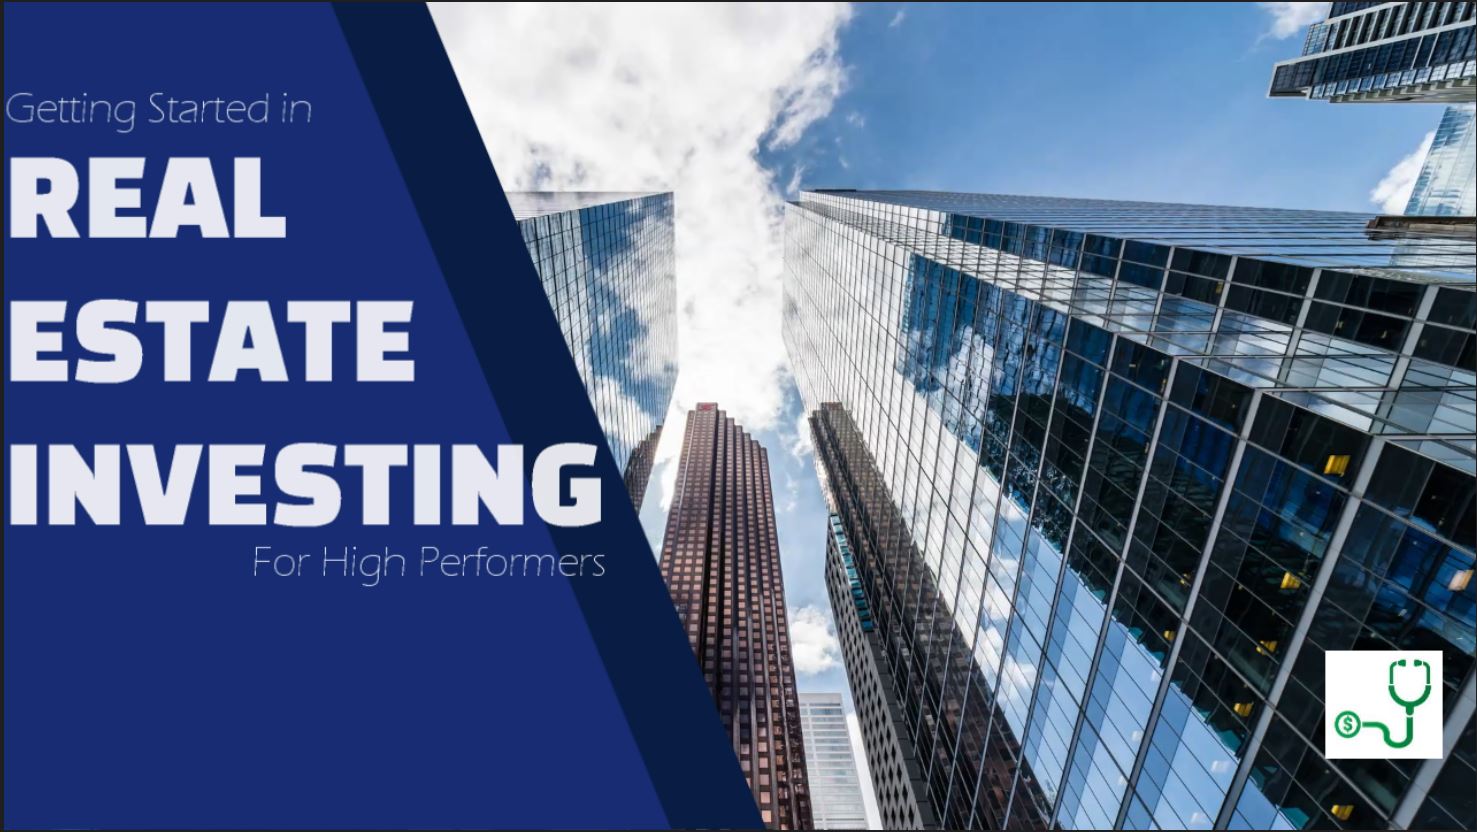 Getting Started in Real Estate Investing for High Performers – 6 Steps to Take